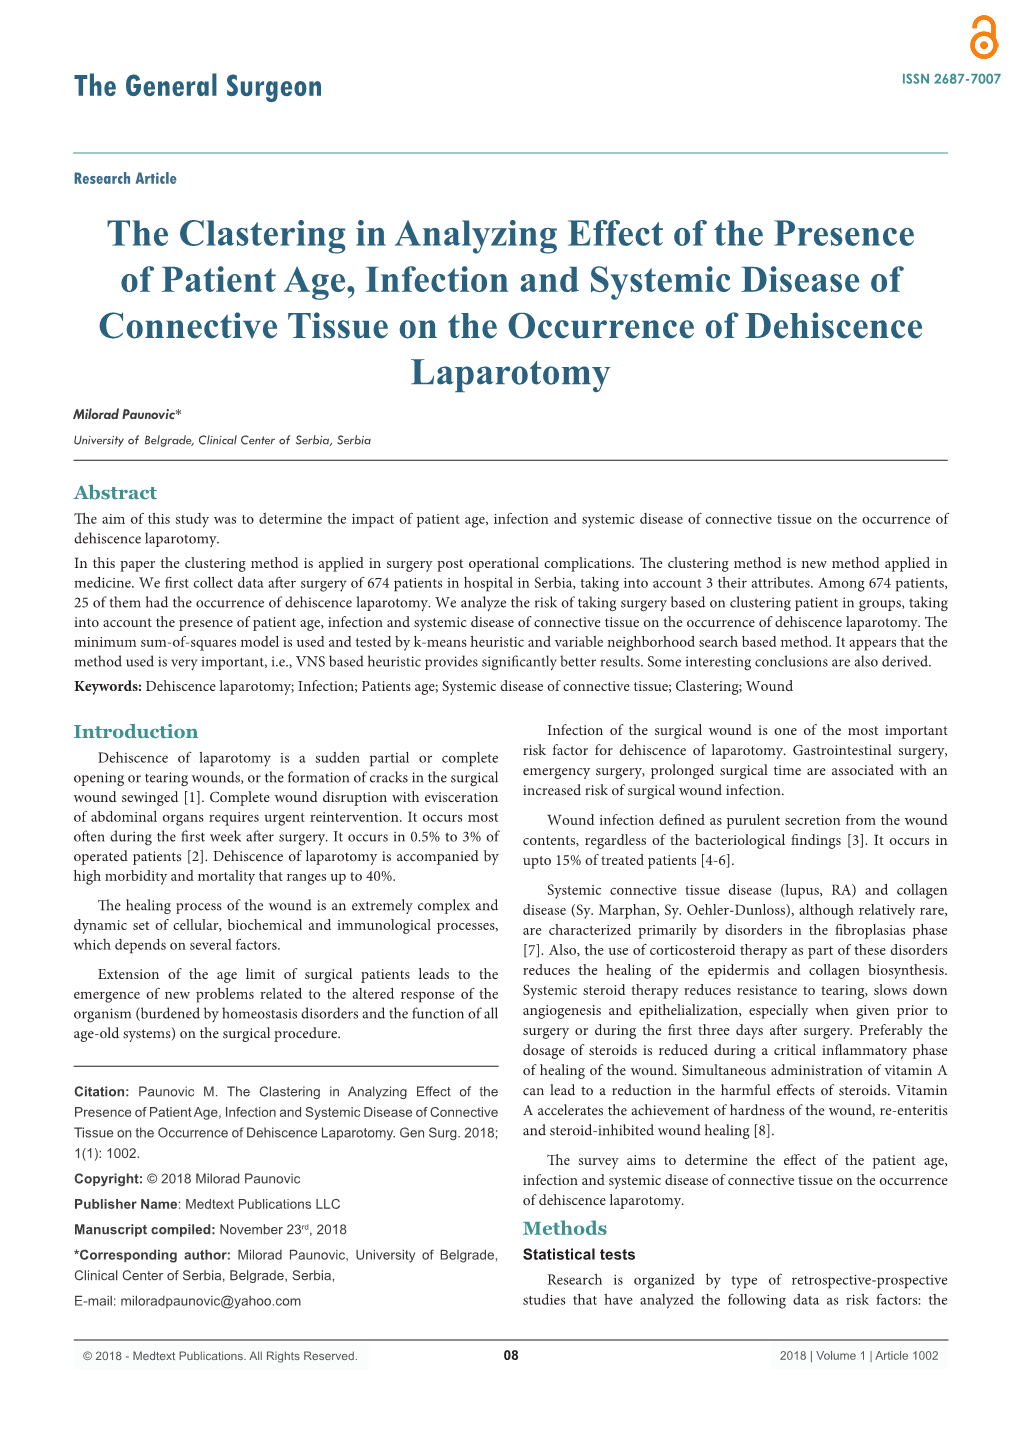 The Clastering in Analyzing Effect of the Presence of Patient Age, Infection and Systemic Disease of Connective Tissue on the Oc